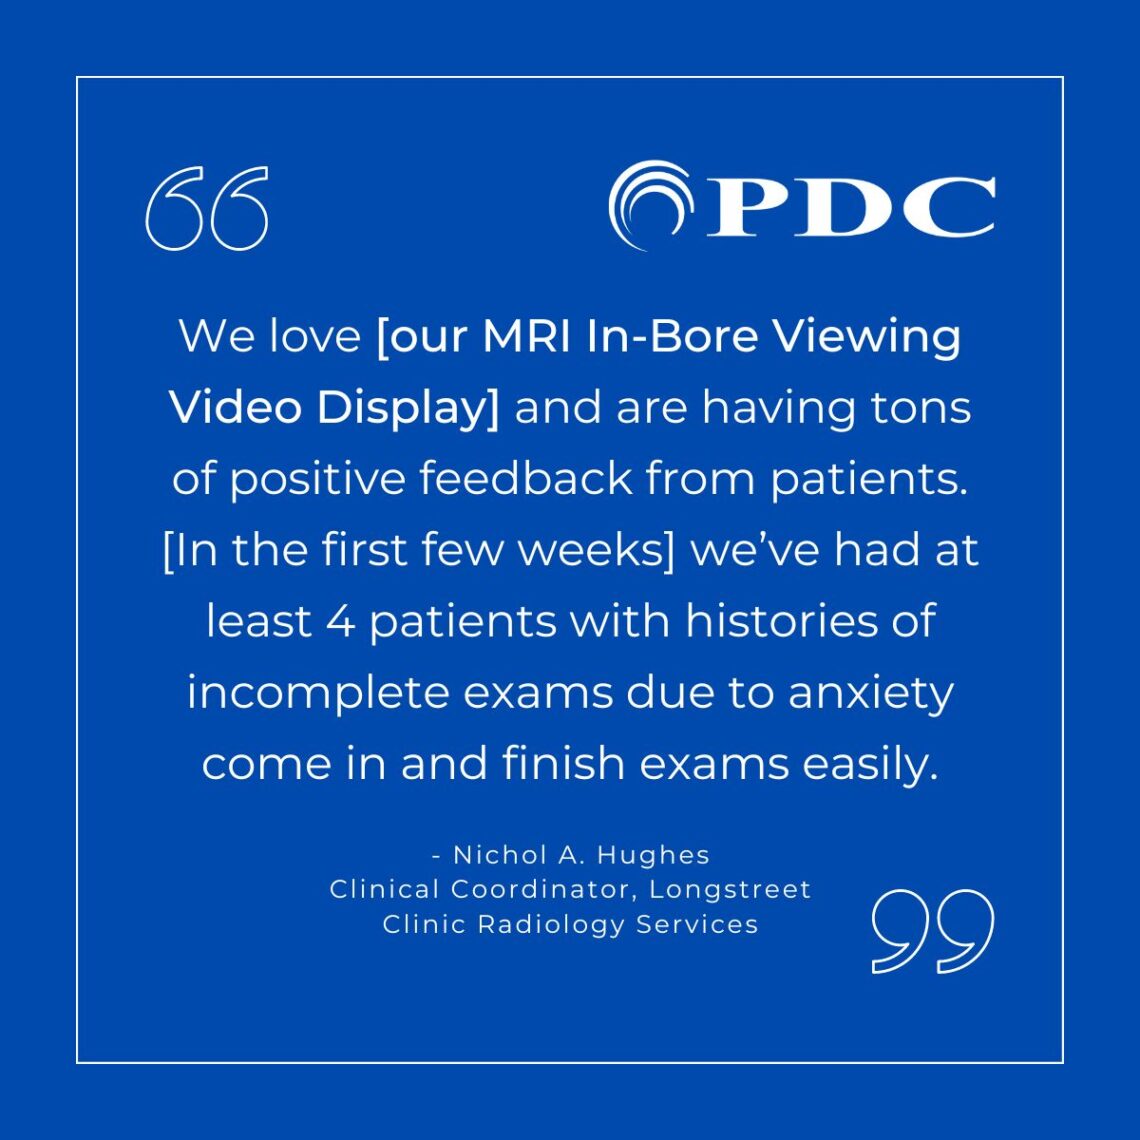 PDC MRI In-Bore Viewing Video Display Testimonial for improved patient experience and MRI productivity